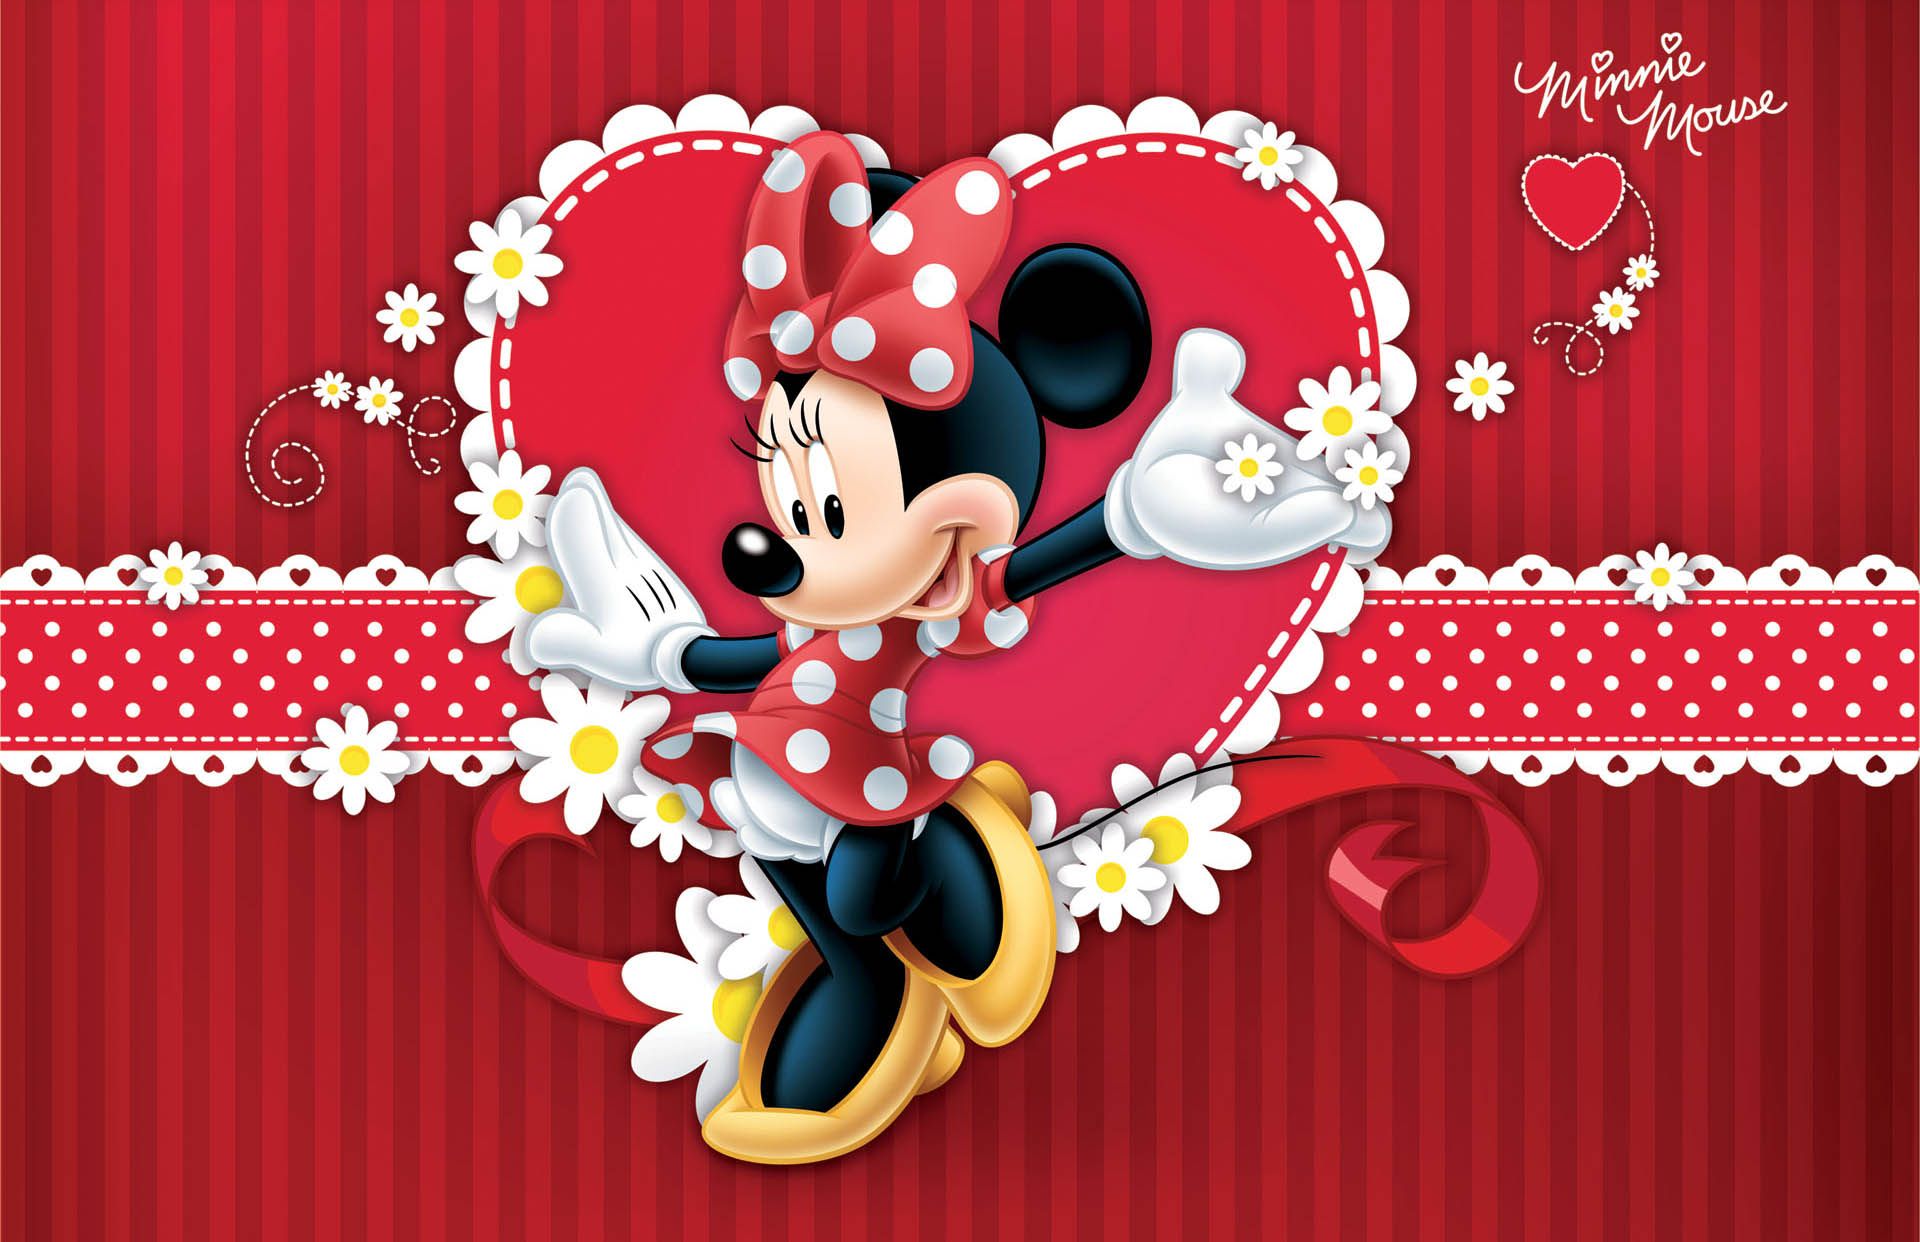 lovely-minnie-mouse-in-red-dress.jpg